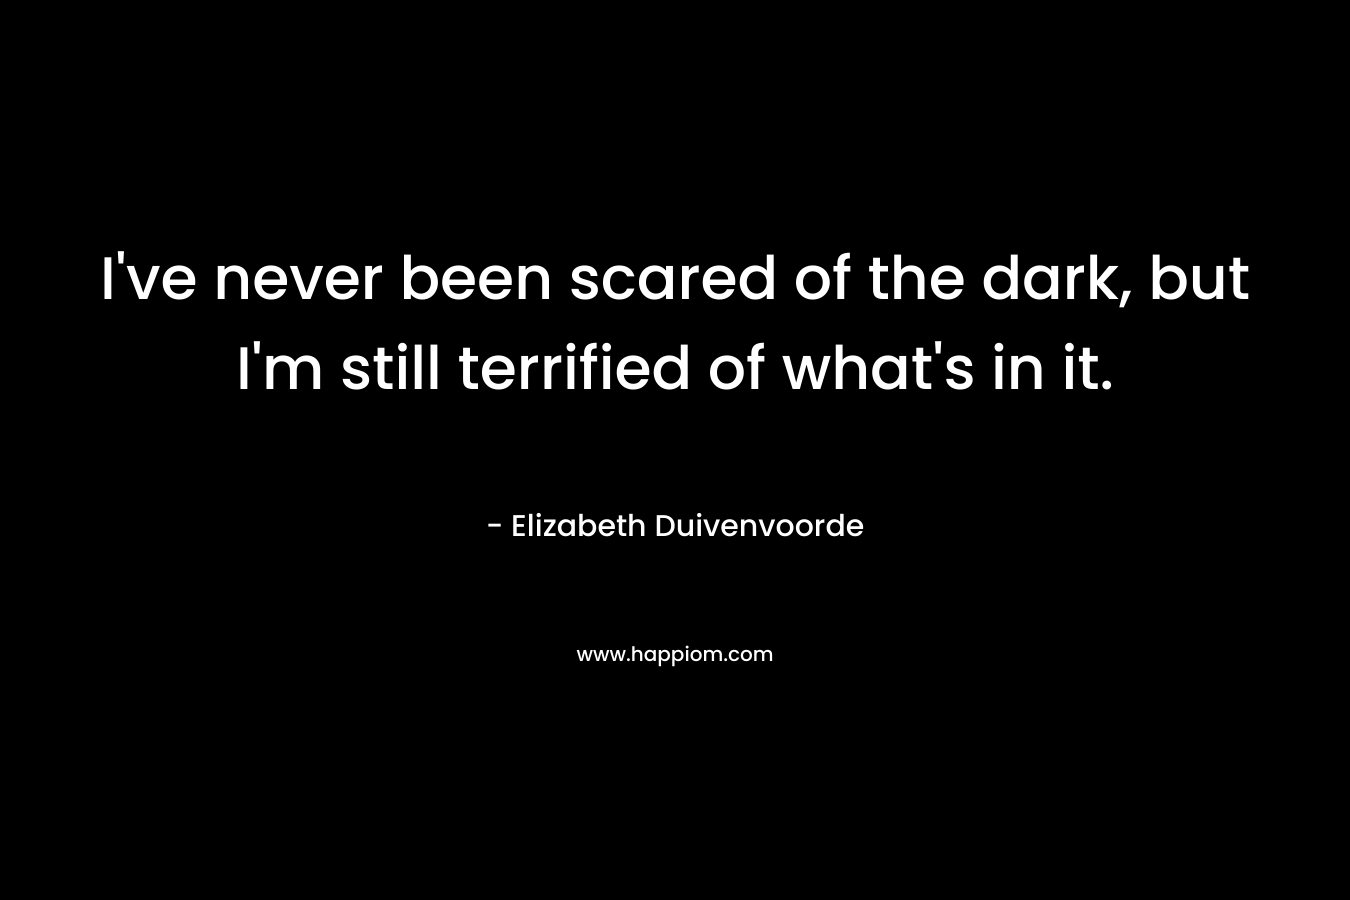 I’ve never been scared of the dark, but I’m still terrified of what’s in it. – Elizabeth Duivenvoorde